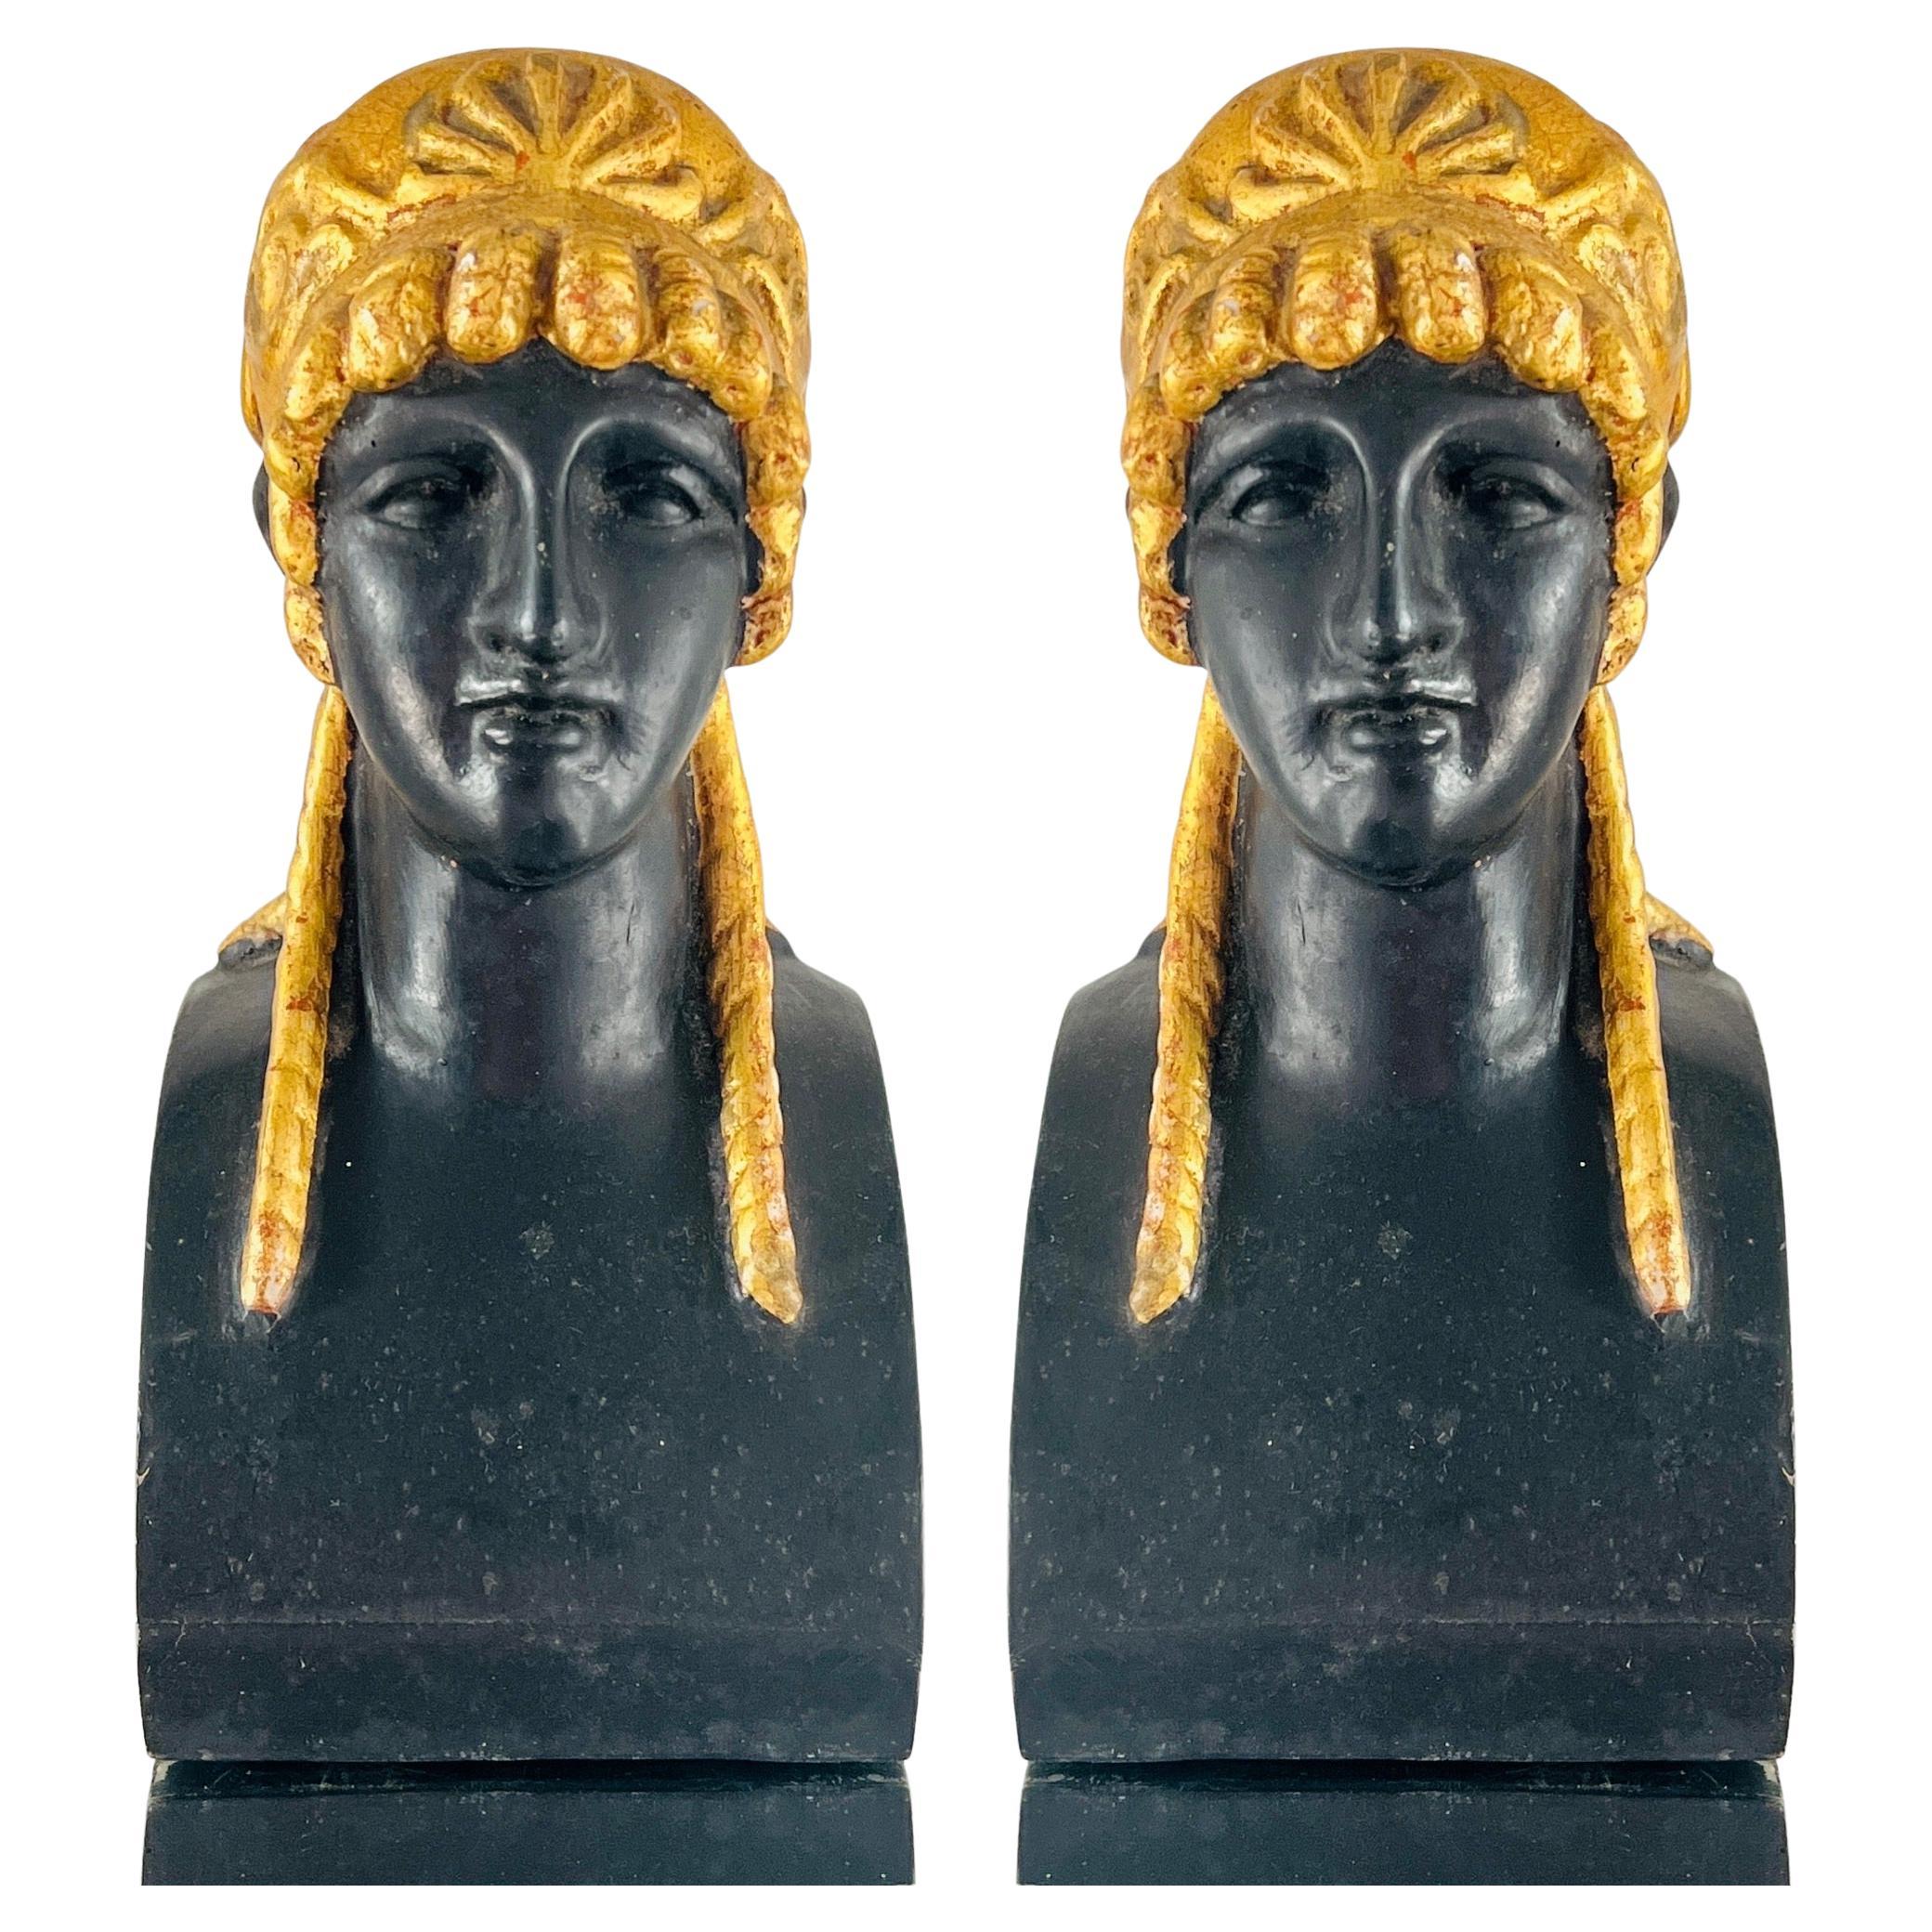 Pair of Gilt Empire Bookend Busts of Greco Roman Woman, Italy, c. 1930's